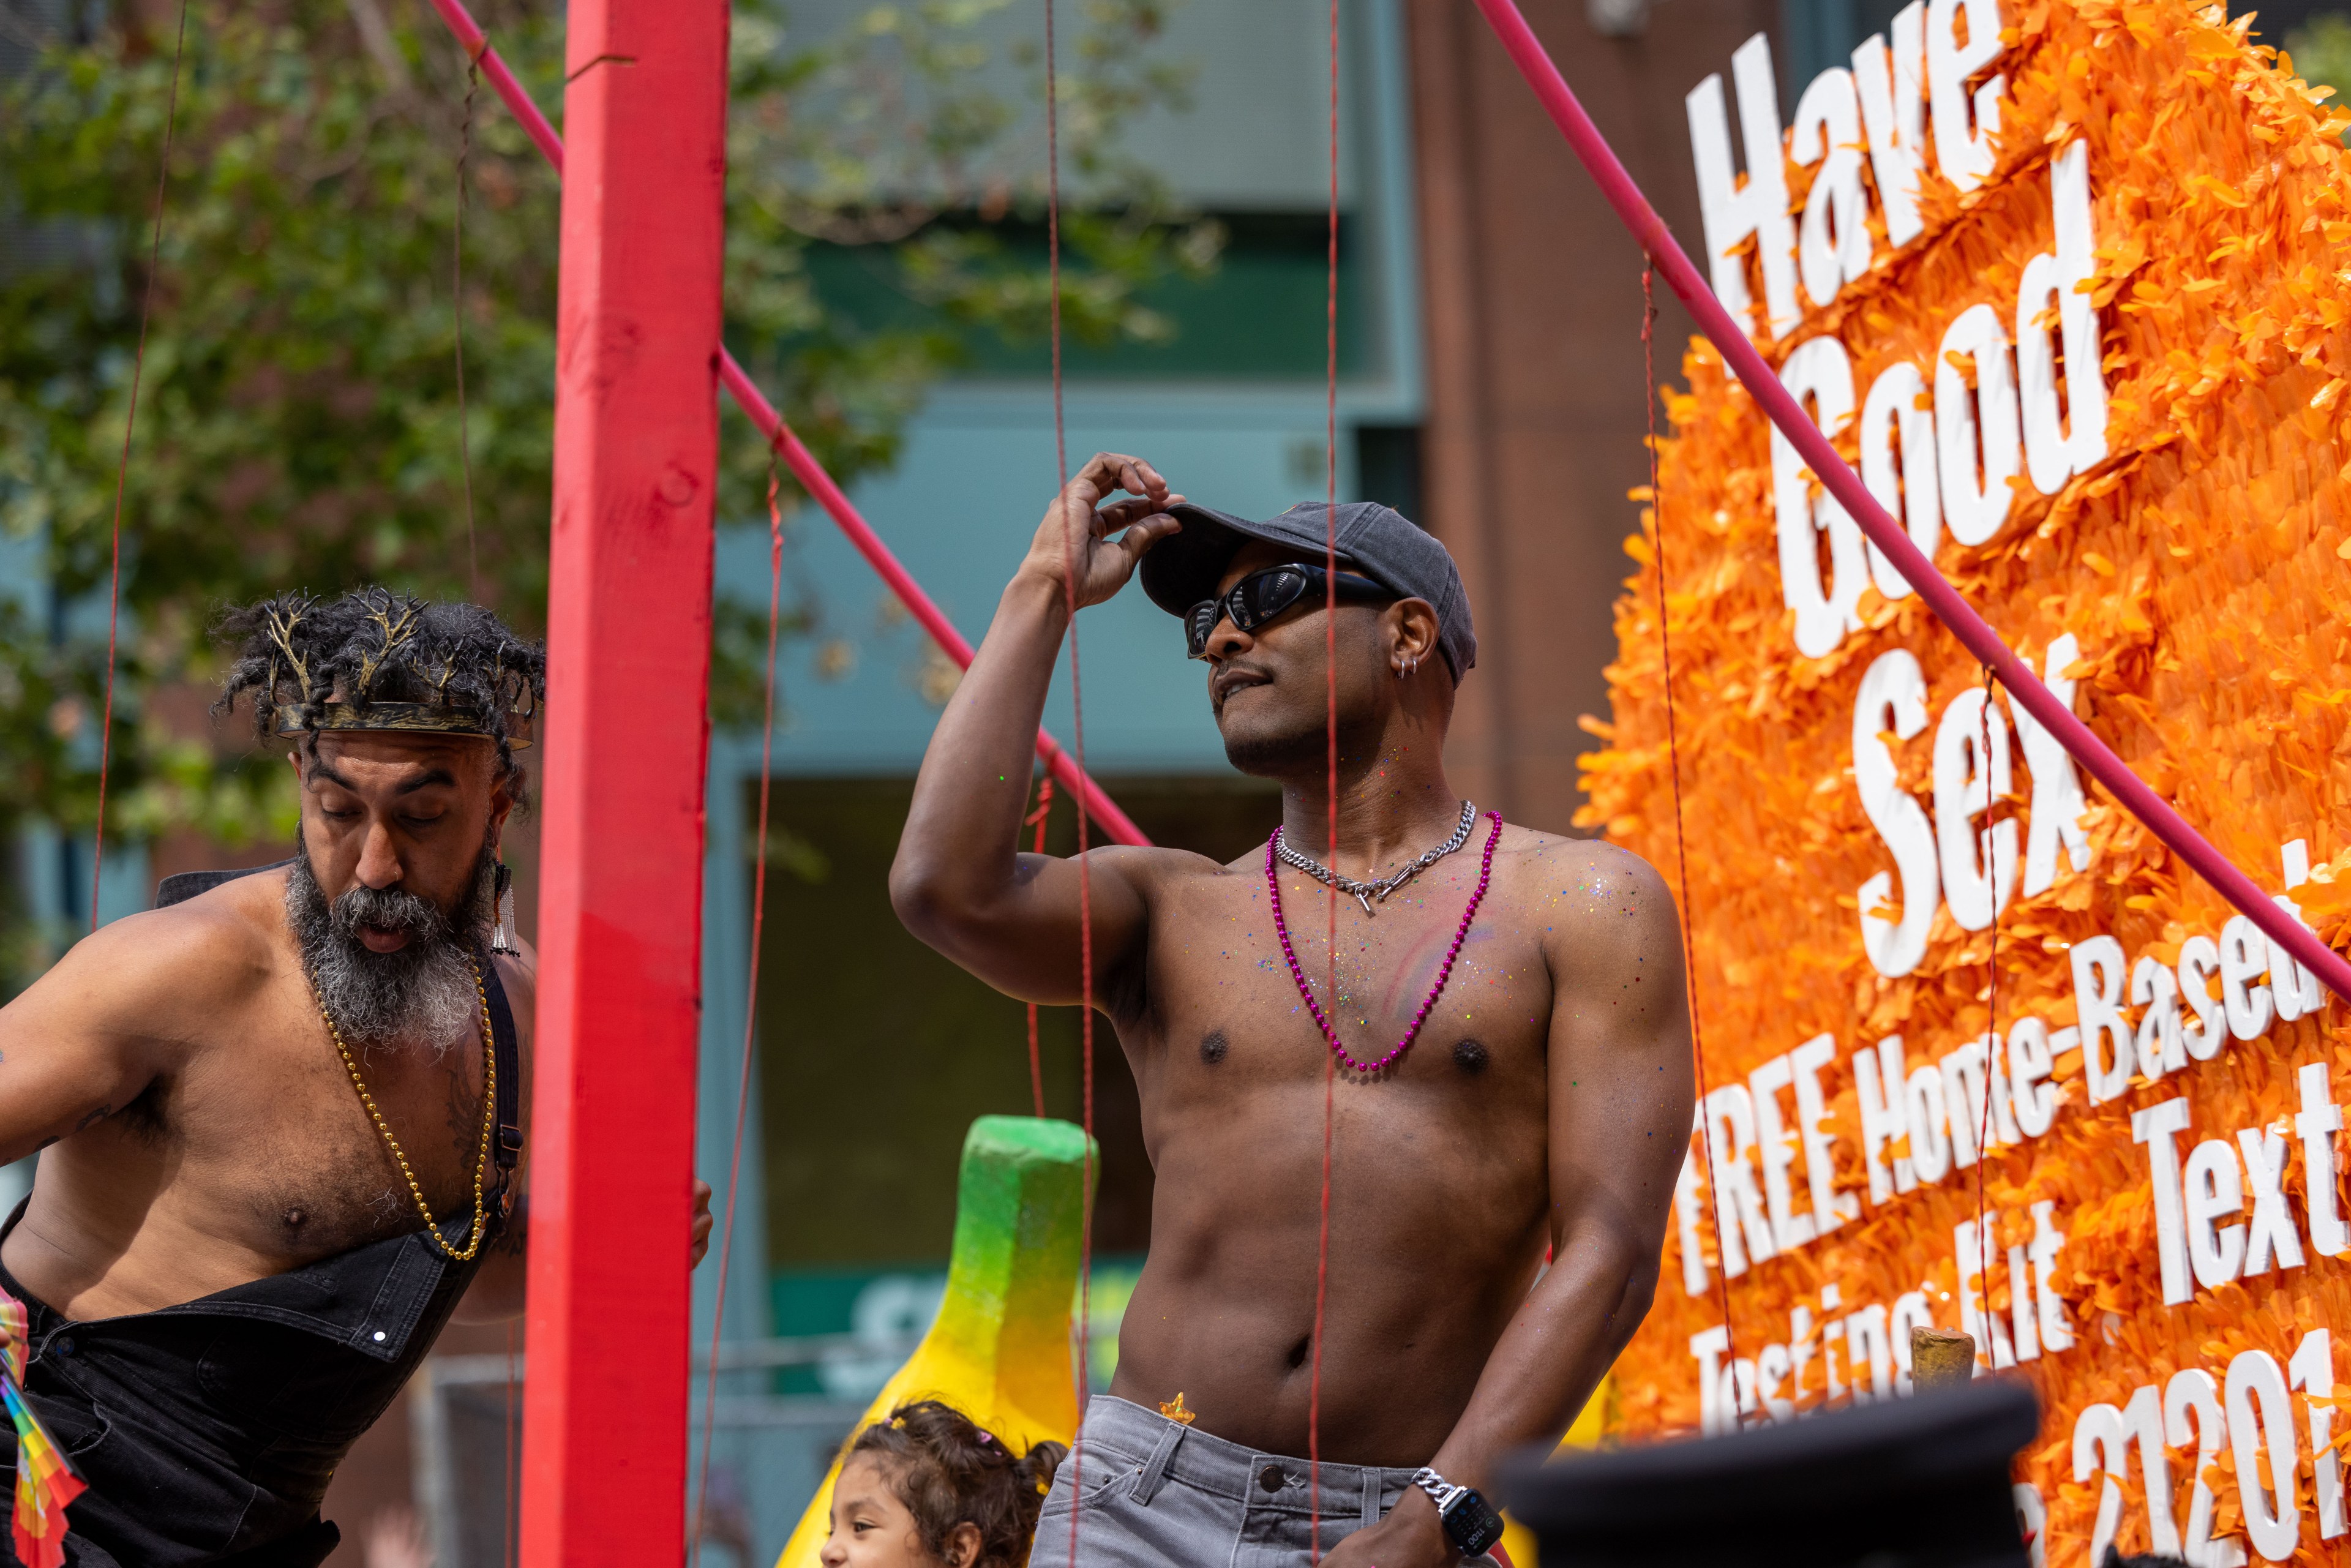 Two shirtless men are celebrating on a float. One wears a flower crown and the other a gray cap and beads. The float has an orange sign with bold white text.